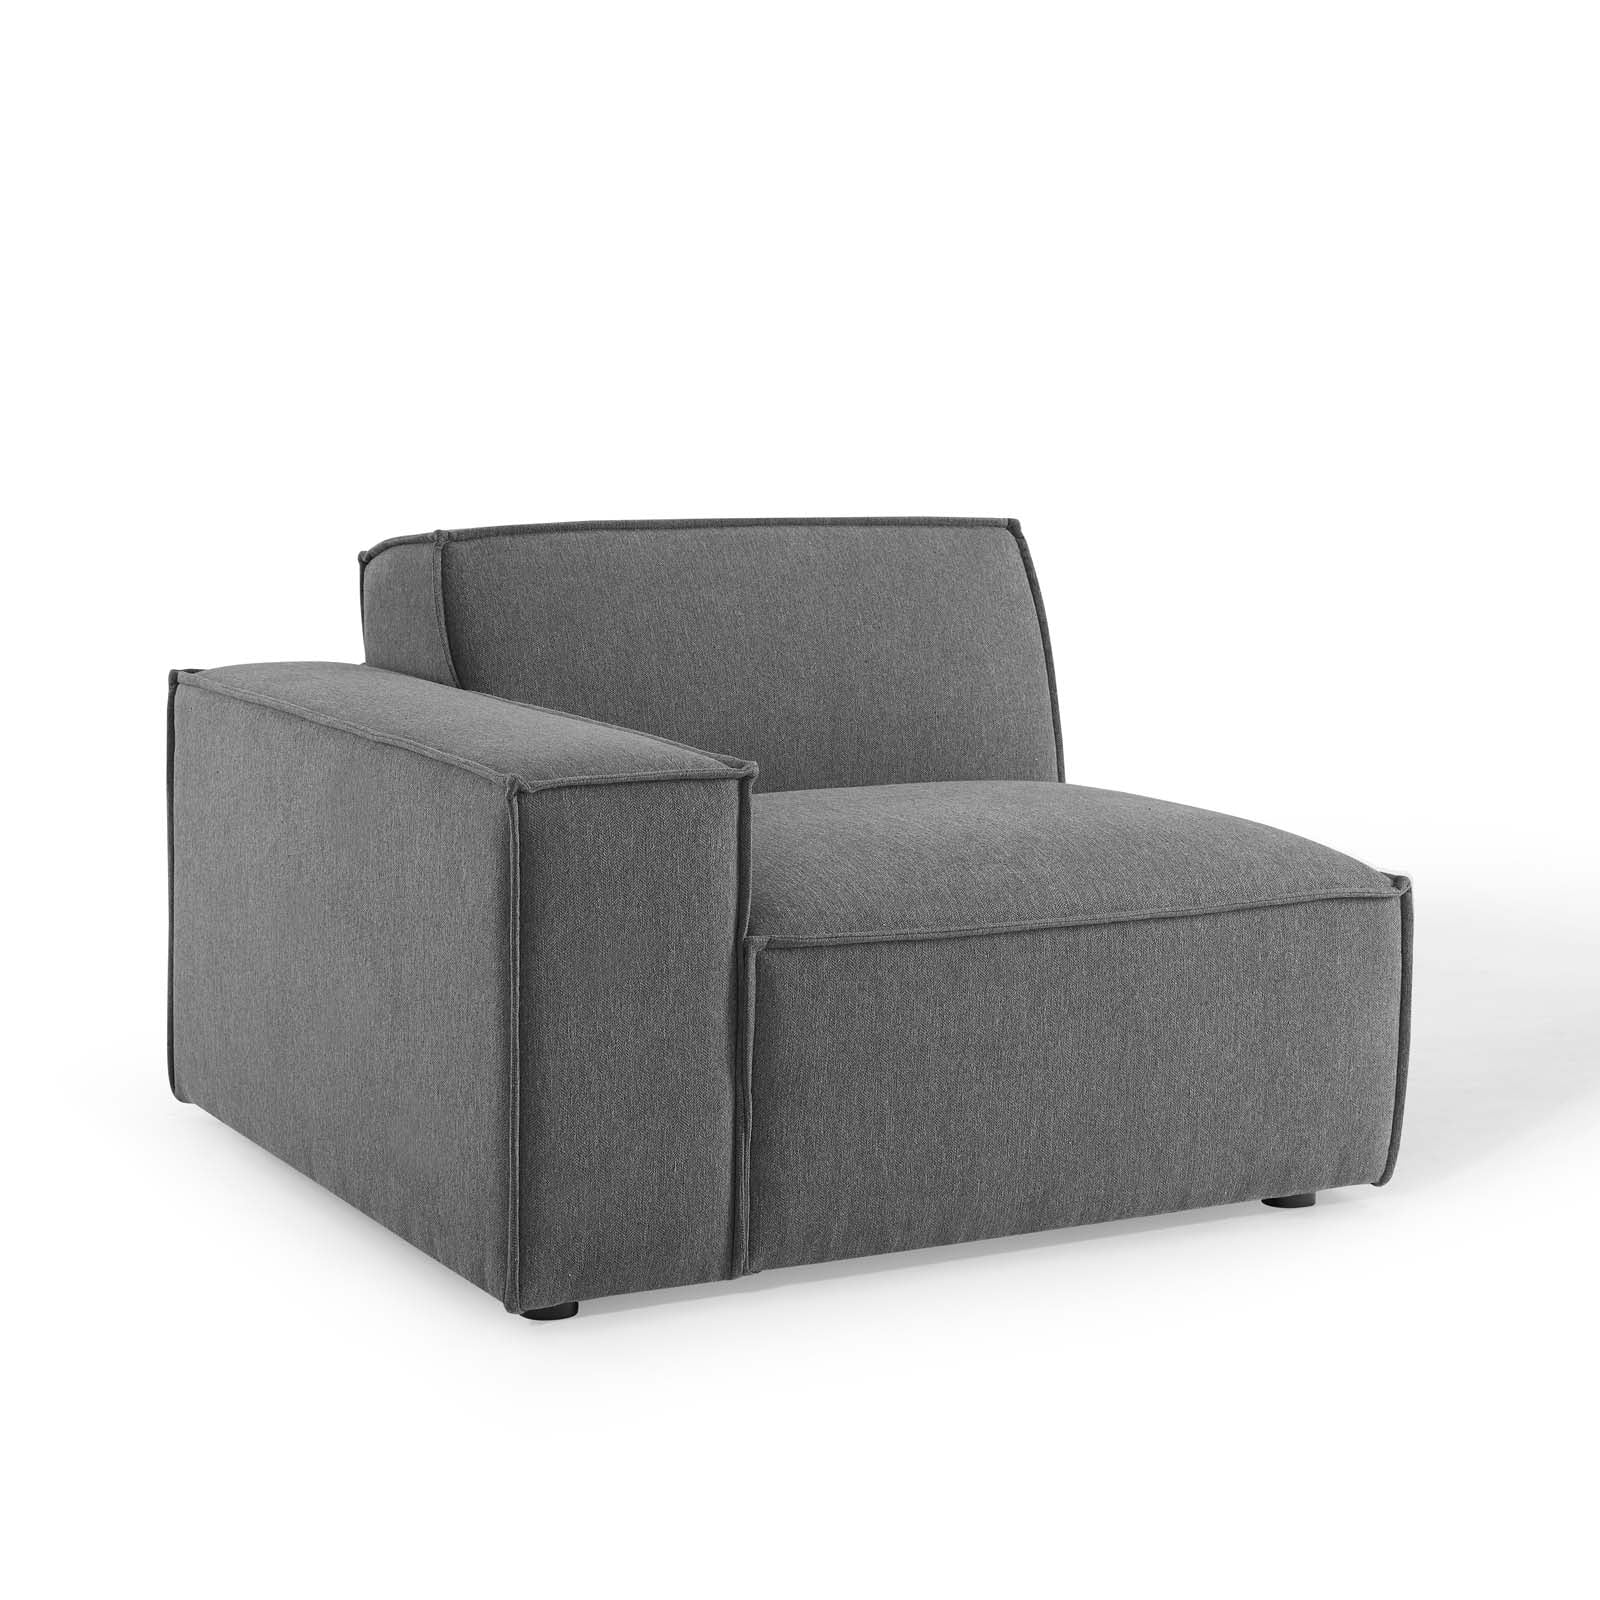 Restore 6-Piece Sectional Sofa - East Shore Modern Home Furnishings